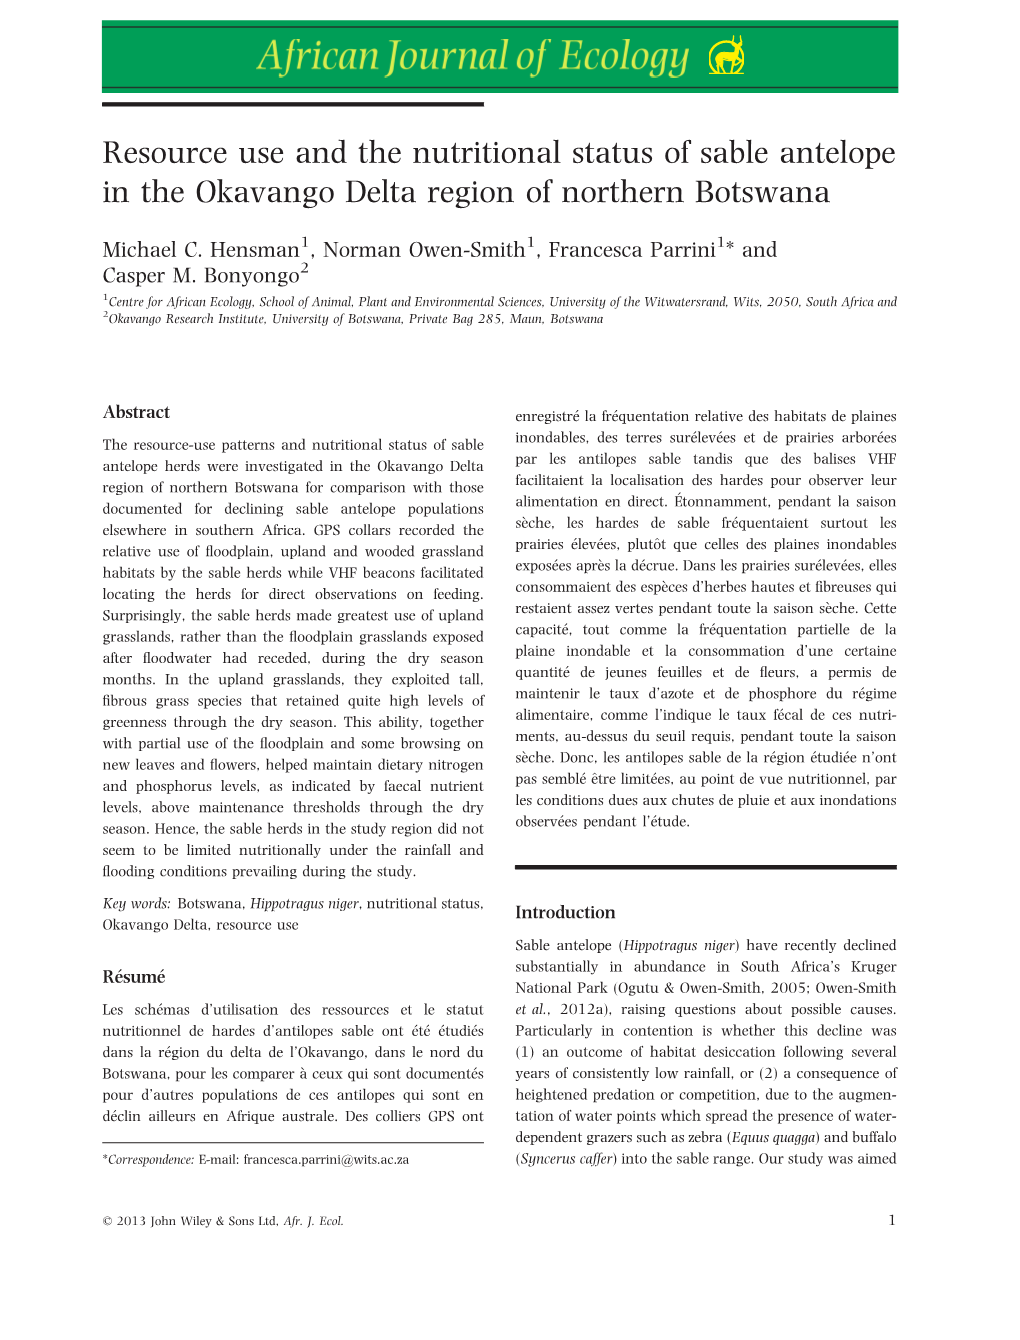 Resource Use and the Nutritional Status of Sable Antelope in the Okavango Delta Region of Northern Botswana